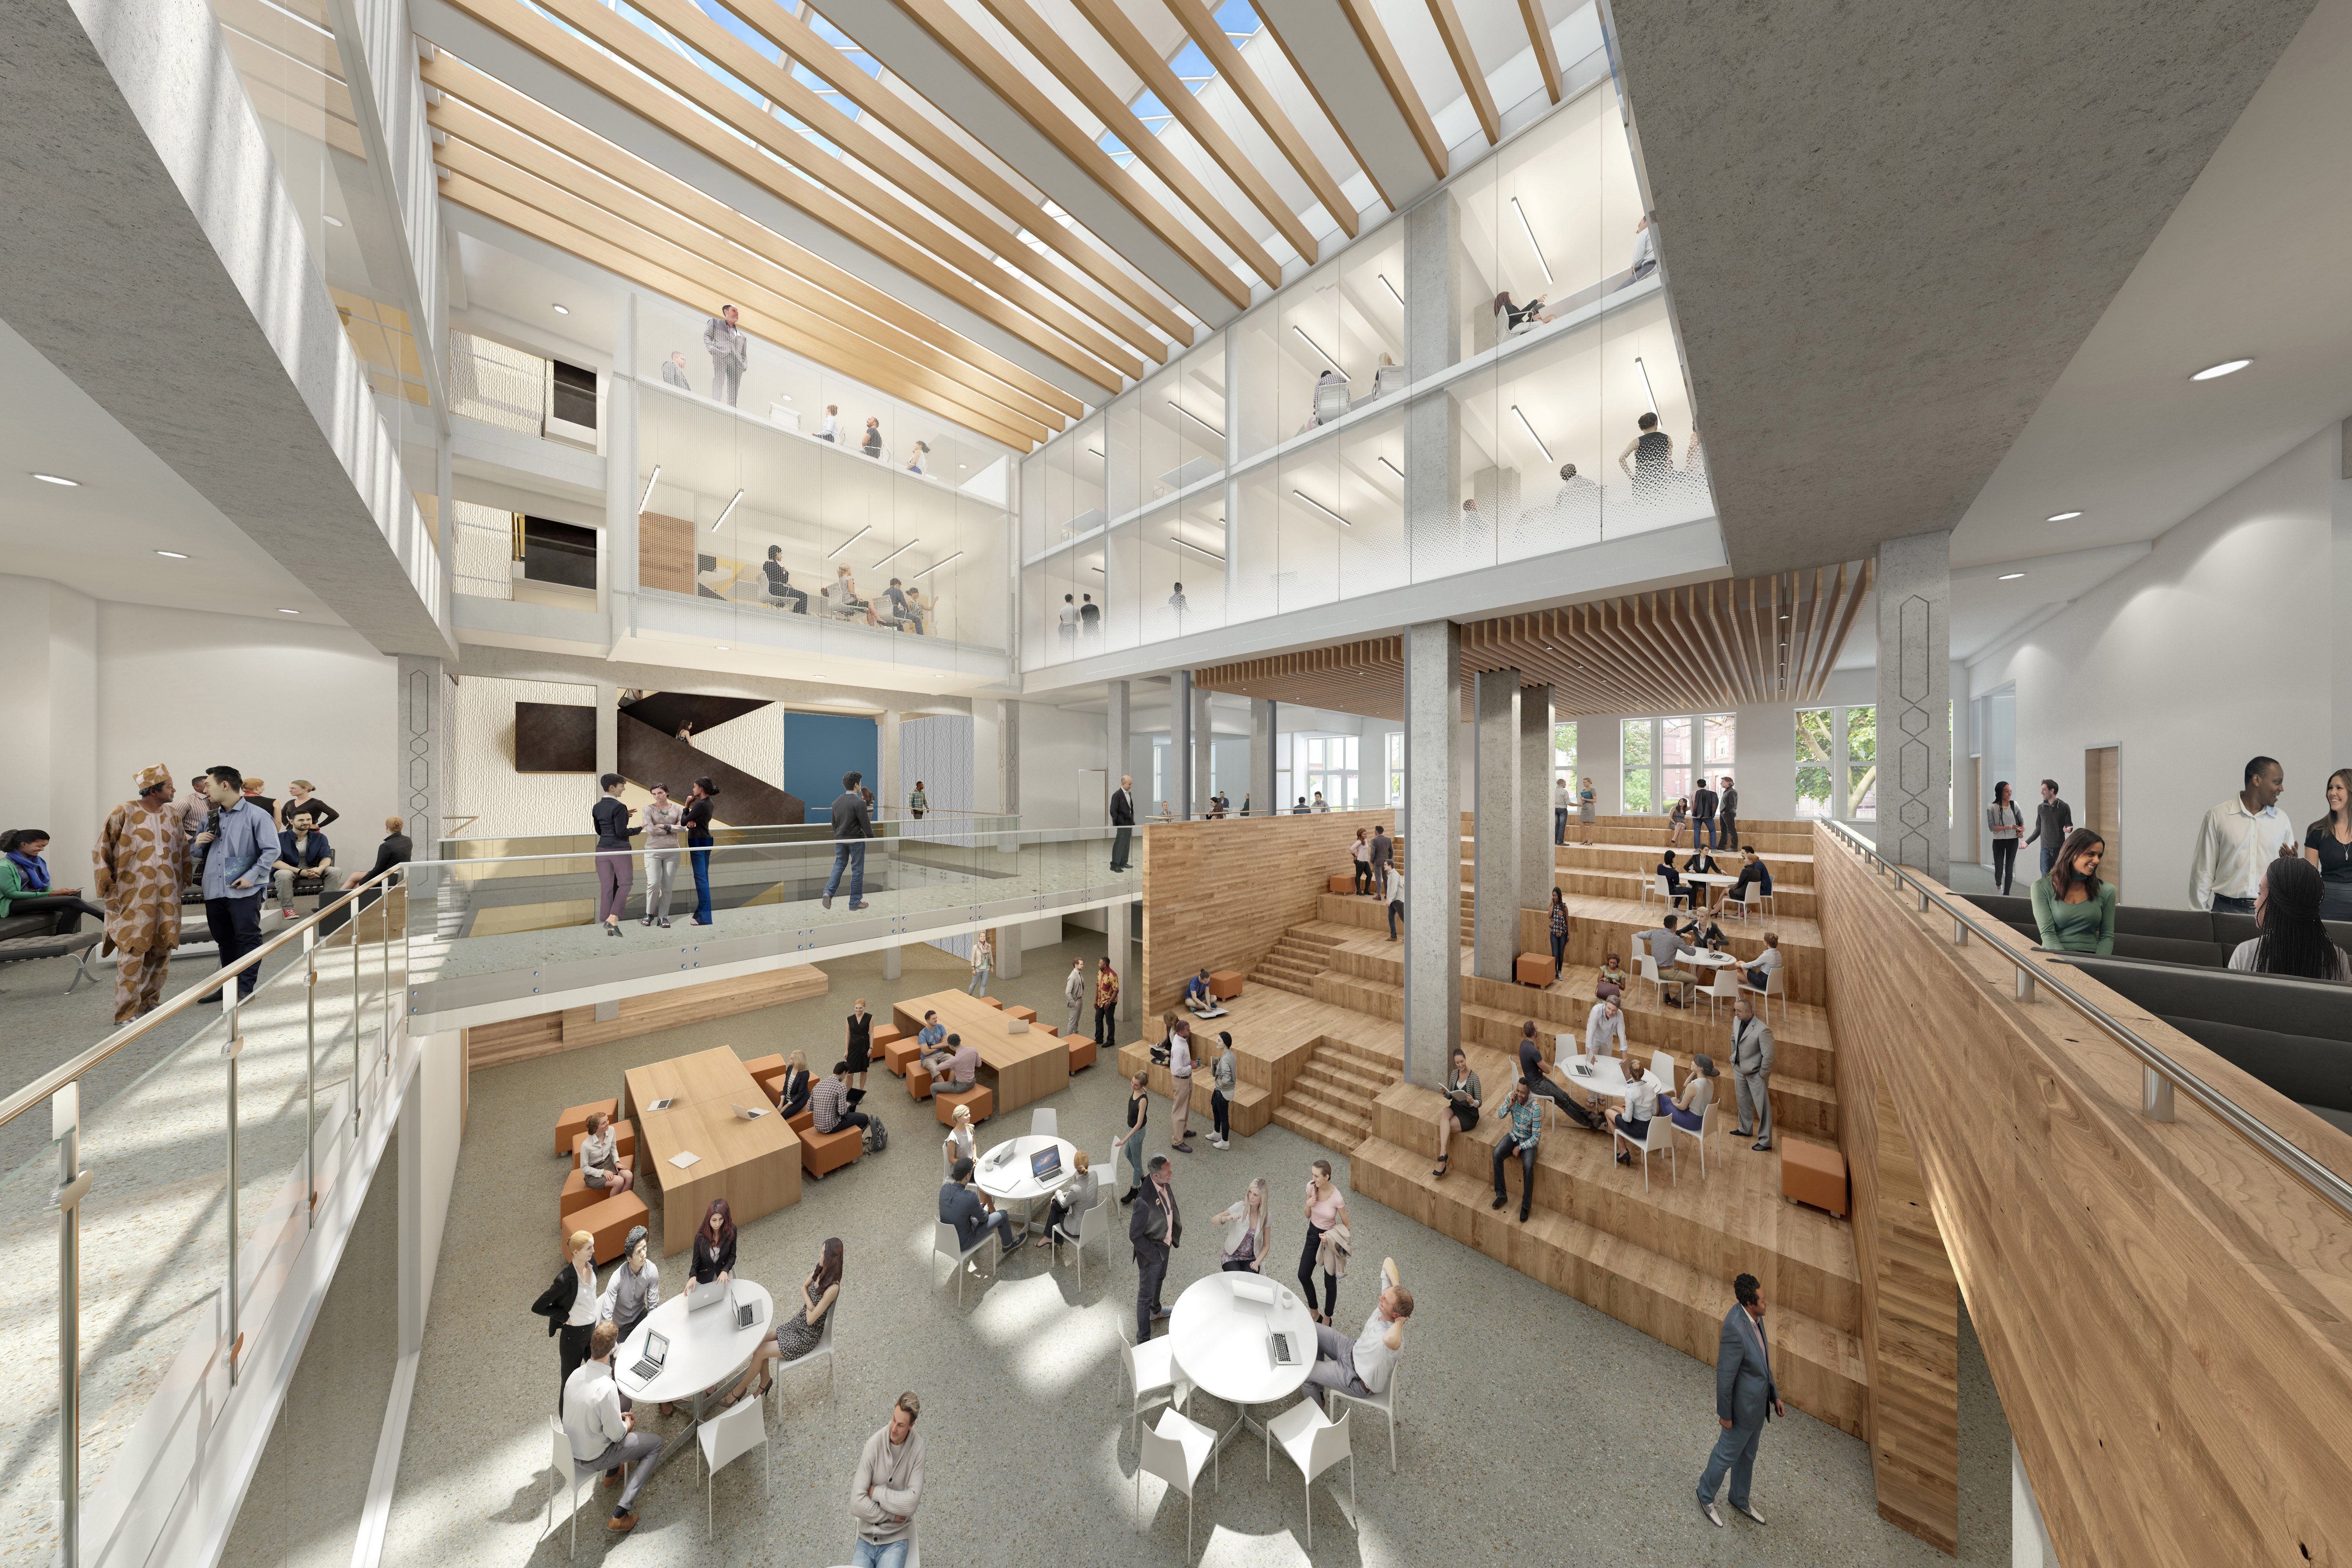 Complete renovation and adaptive re-use of a student residence building into a new school. The renovation will feature a large central Forum Atrium to be cut into the existing structure, and a large new roof level meeting space and terrace.